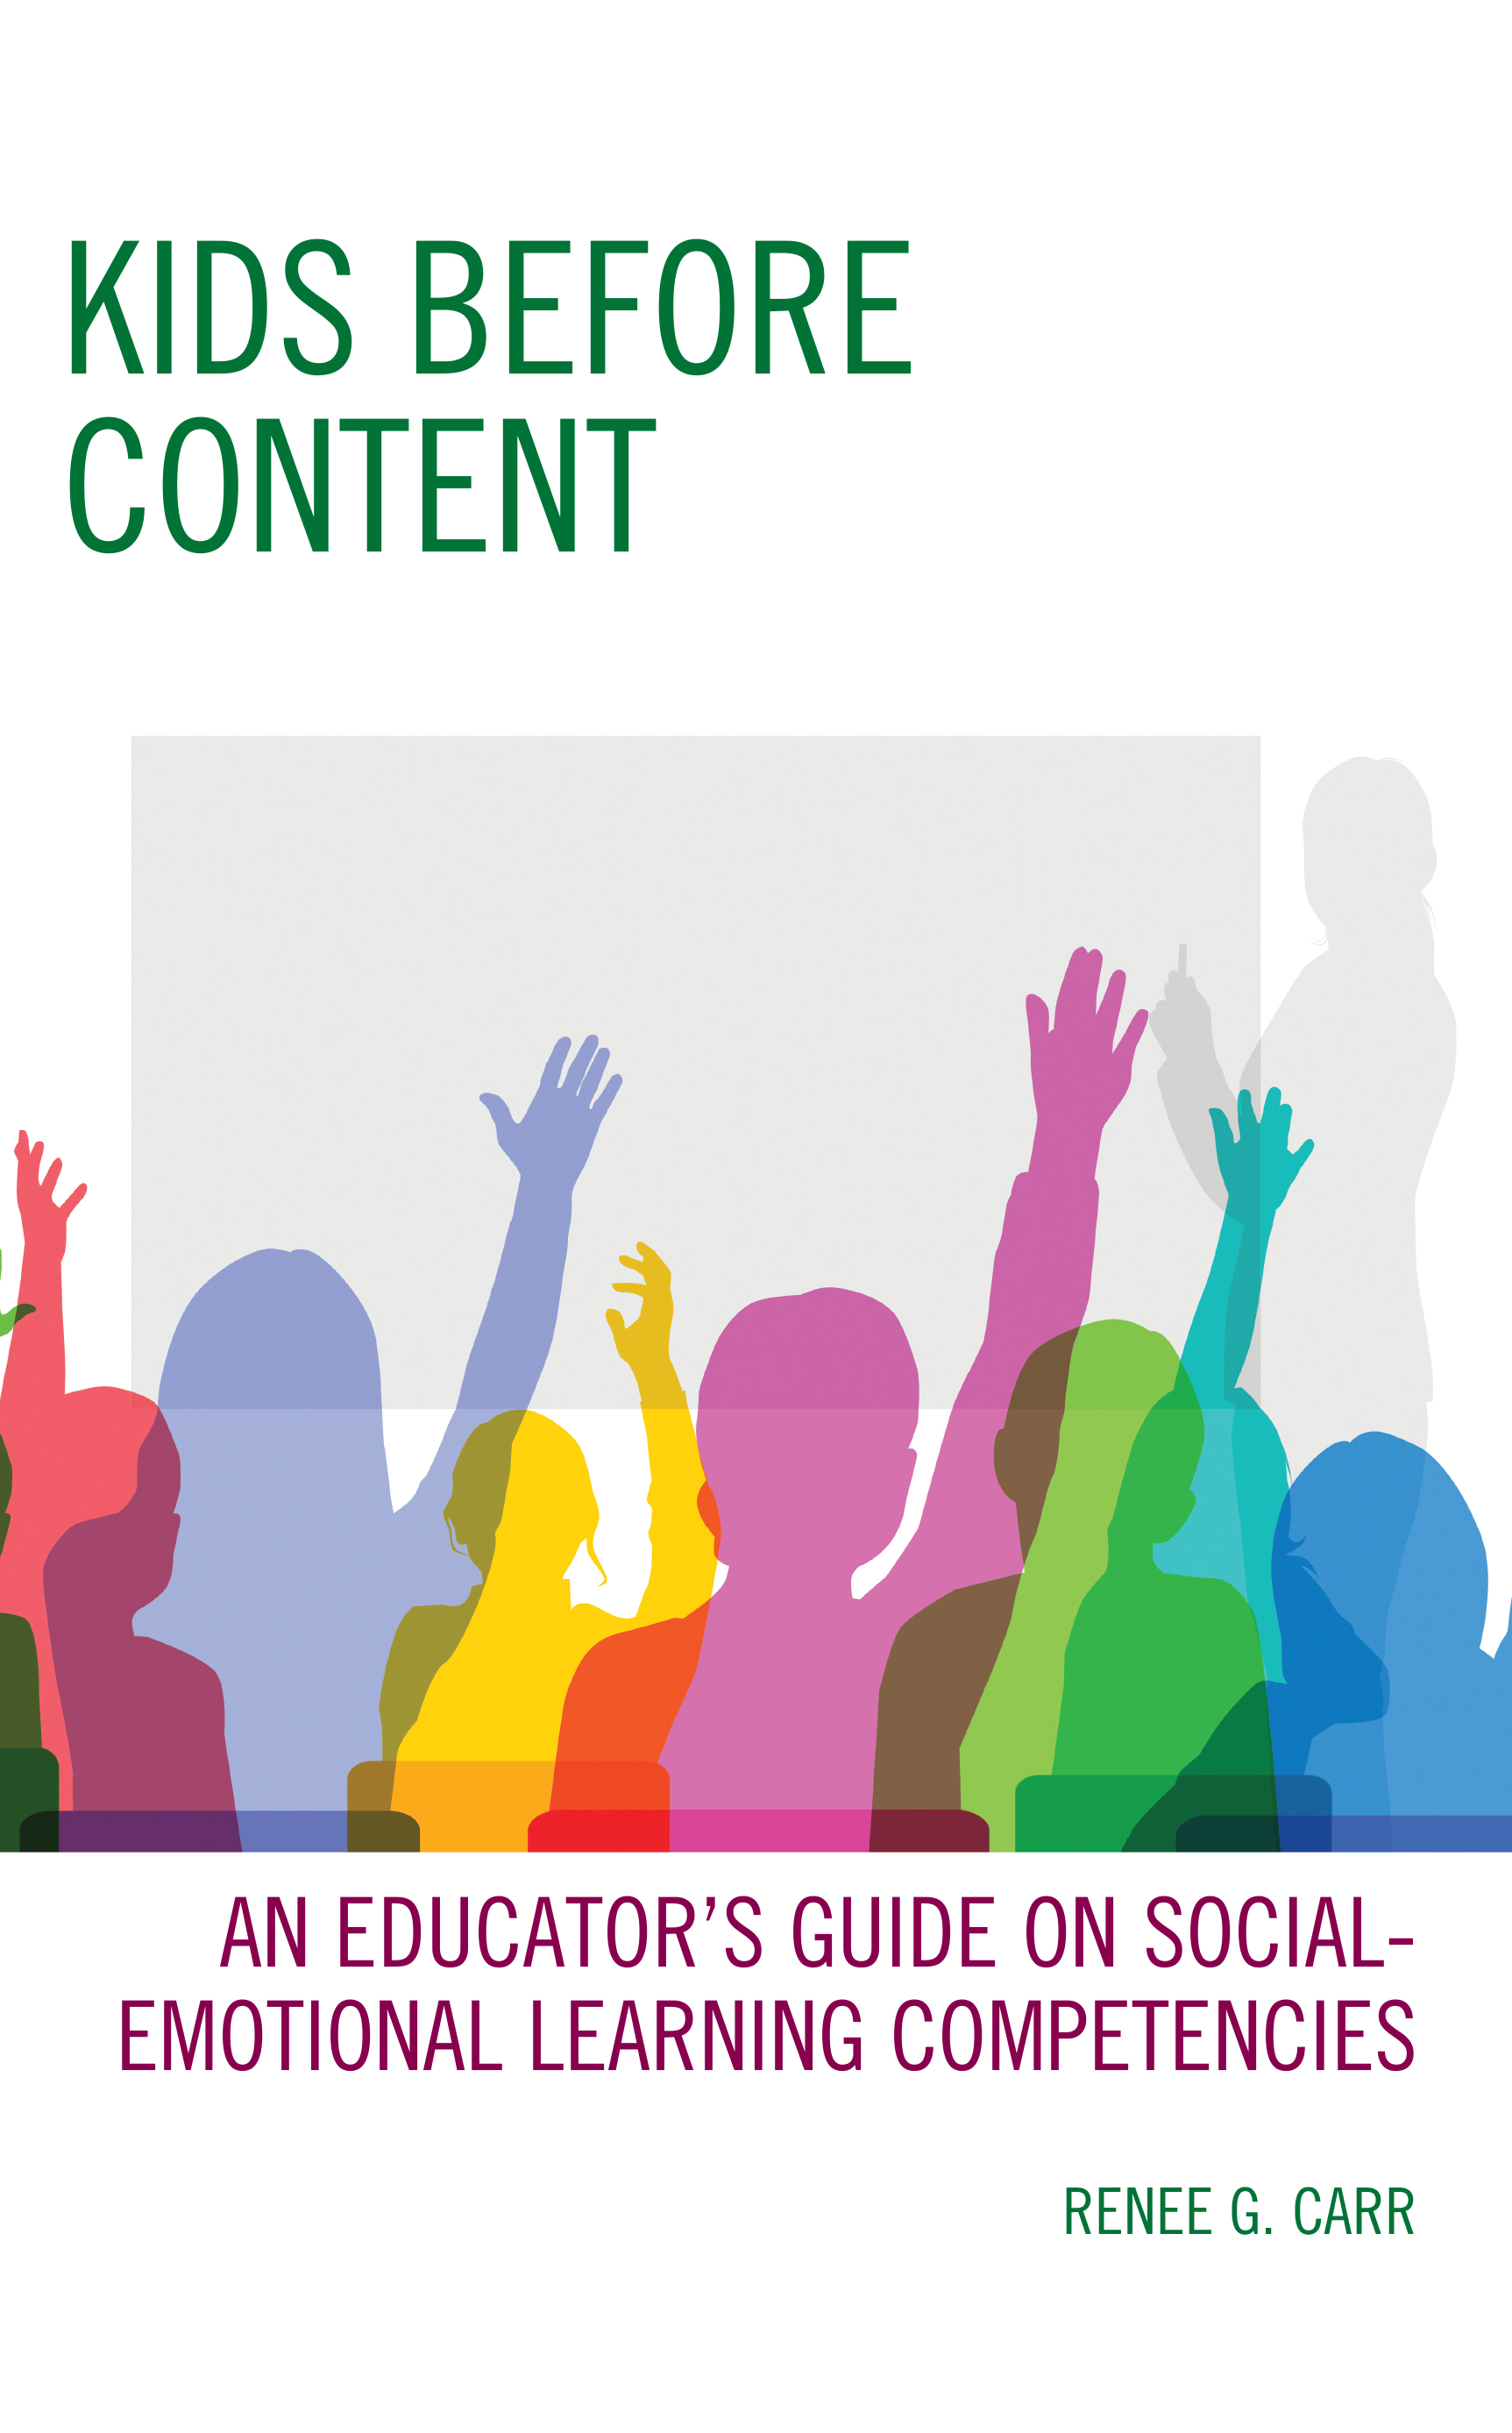 Kids Before Content: An Educator’s Guide on Social-Emotional Learning Competencies